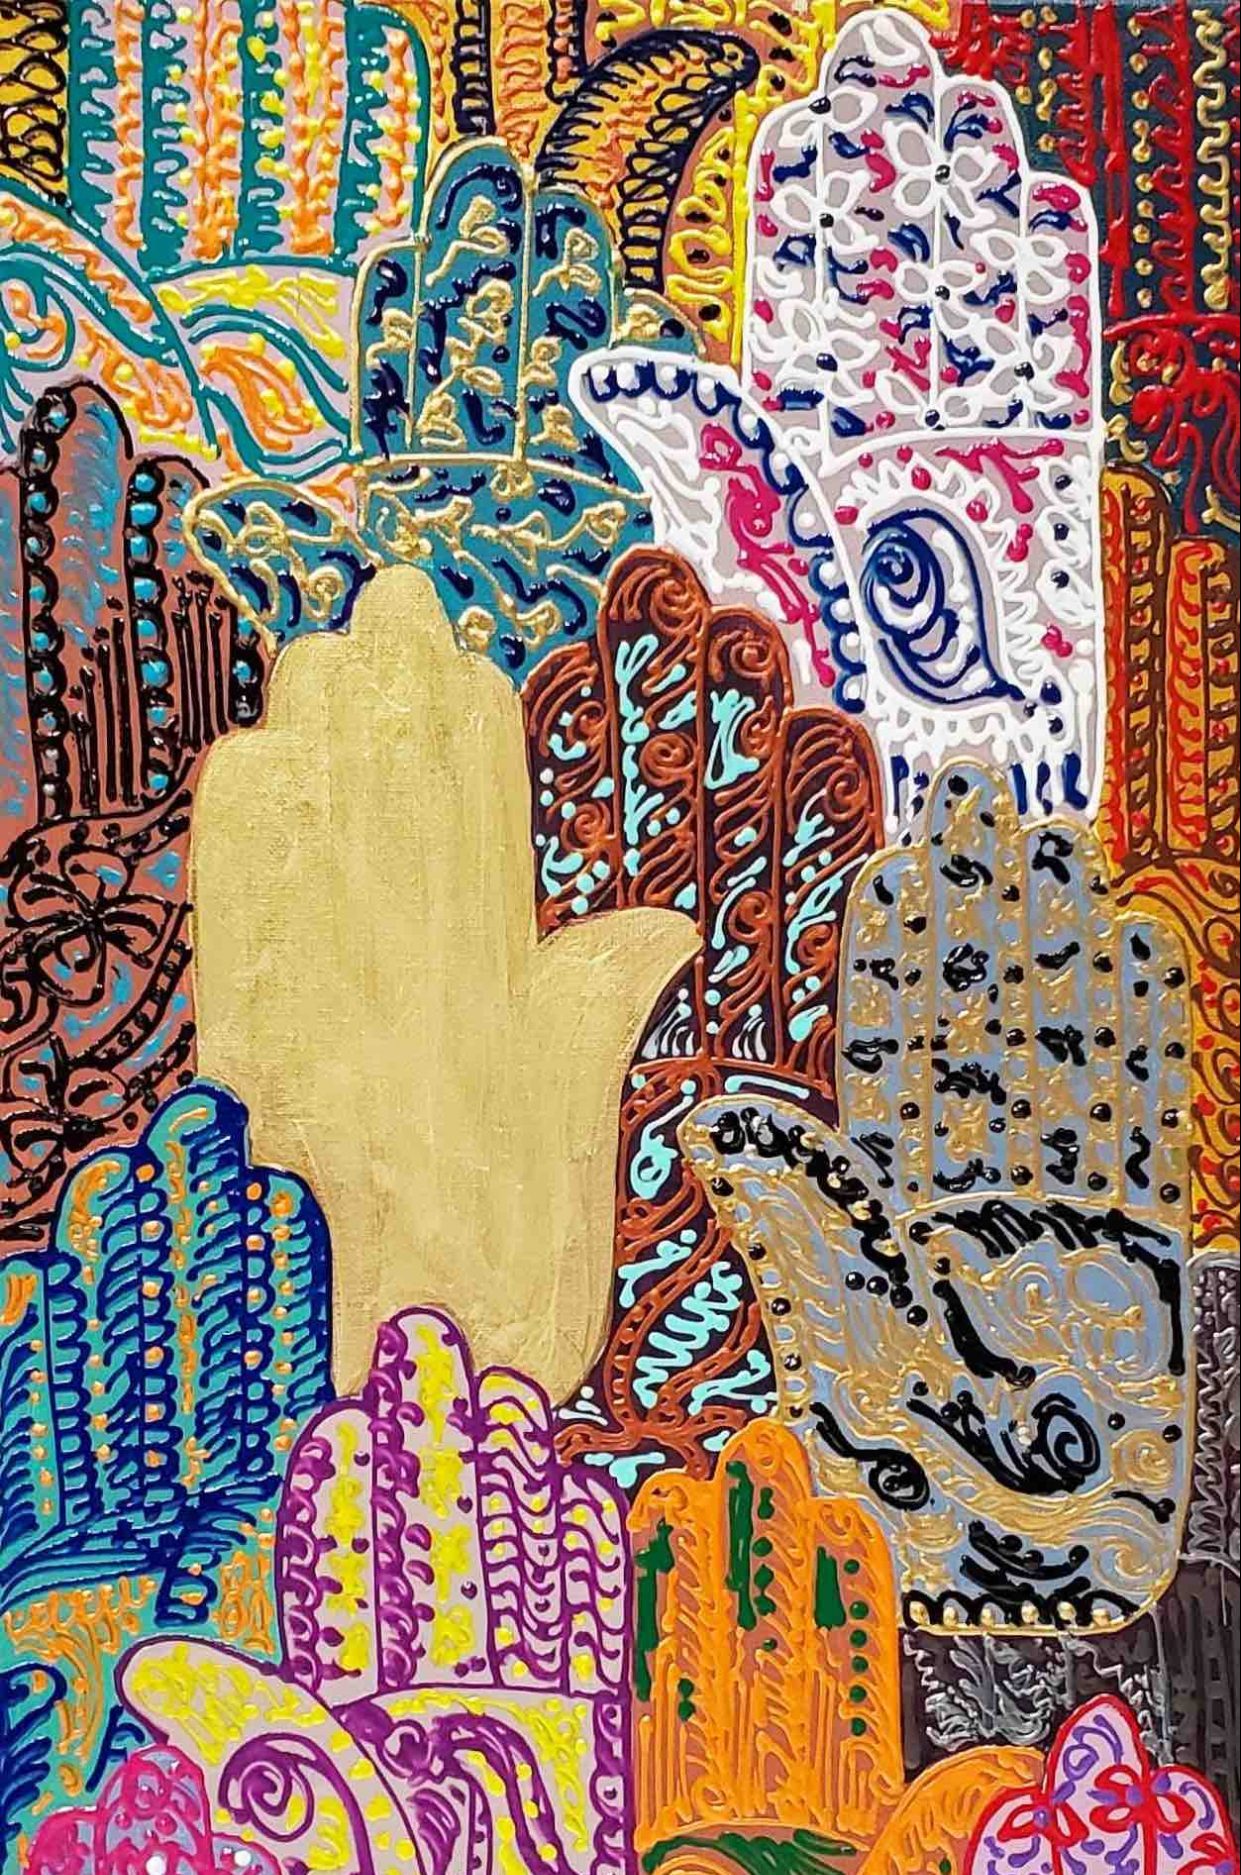 A piece of artwork composed of layers of hands palm up, depicted in many colors and with many patterns